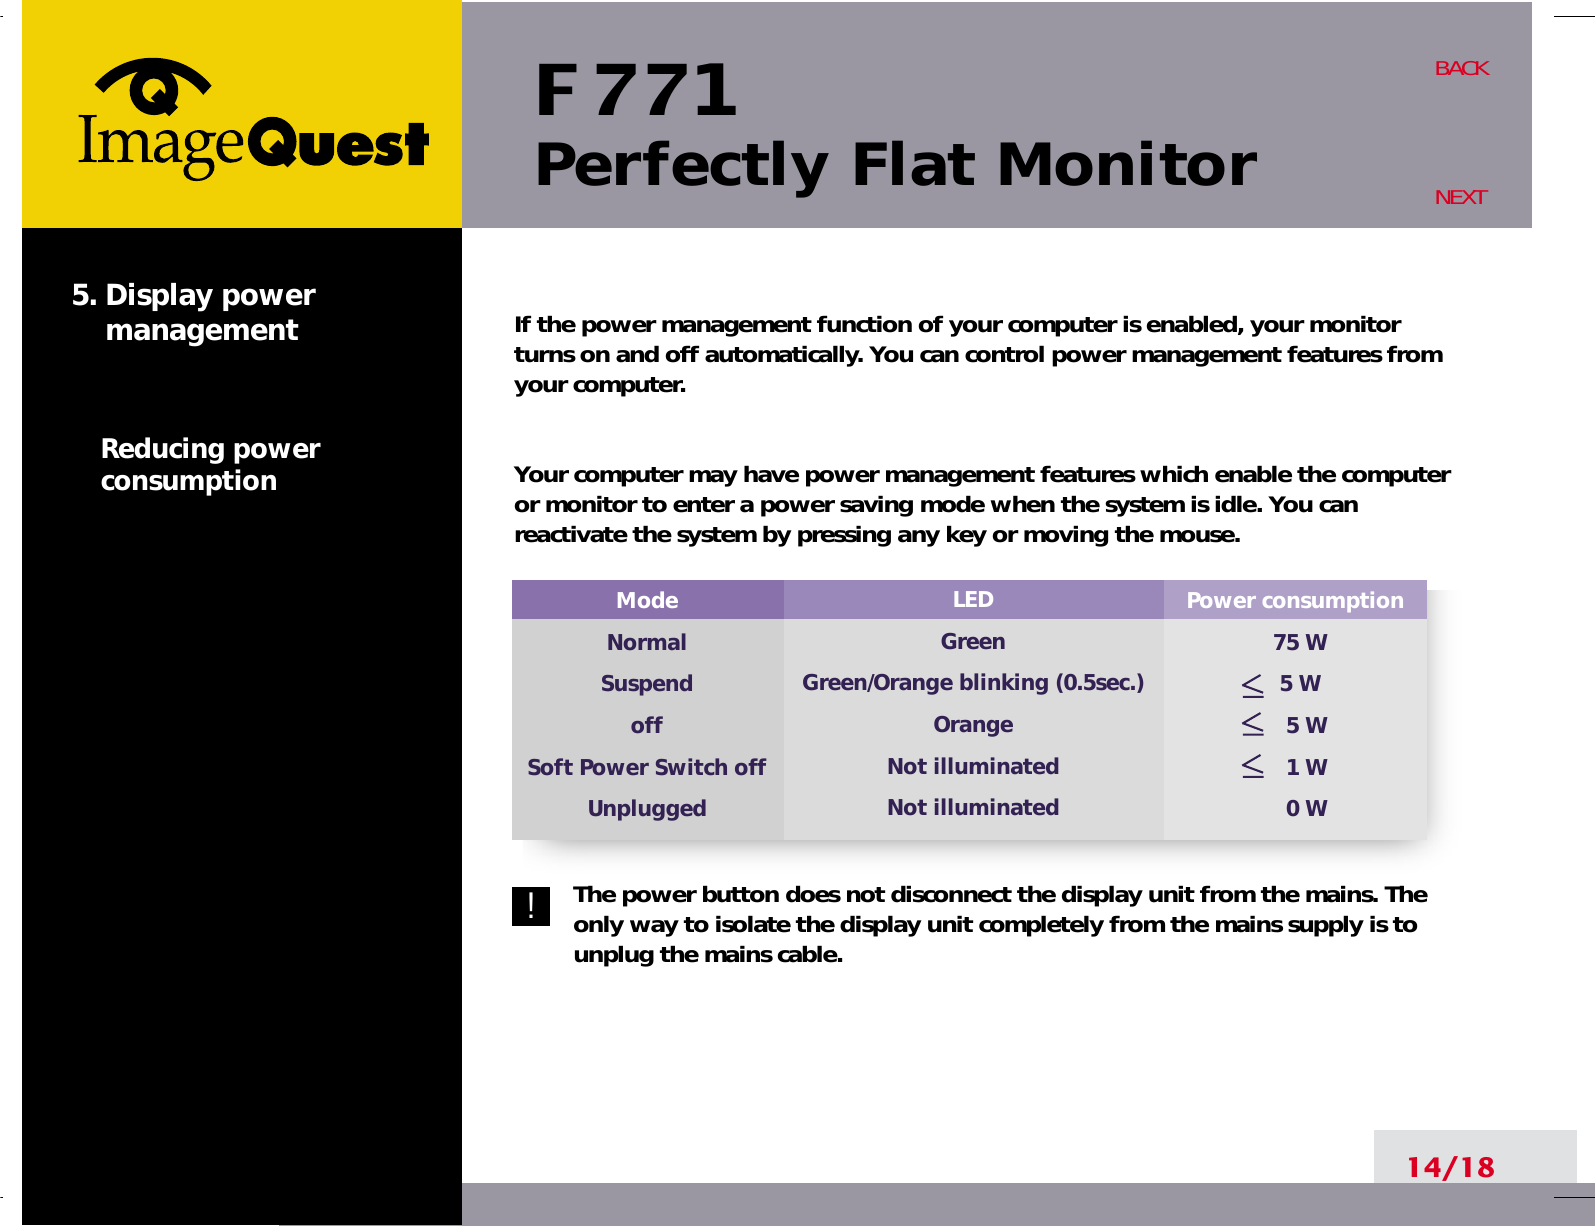 F 771Perfectly Flat Monitor14/18BACKNEXT5. Display powermanagementReducing powerconsumption!Power consumption75 W 5 W5 W1 W0 WModeNormalSuspendoffSoft Power Switch offUnpluggedLEDGreenGreen/Orange blinking (0.5sec.)OrangeNot illuminatedNot illuminatedIf the power management function of your computer is enabled, your monitorturns on and off automatically. You can control power management features fromyour computer.Your computer may have power management features which enable the computeror monitor to enter a power saving mode when the system is idle. You canreactivate the system by pressing any key or moving the mouse.The power button does not disconnect the display unit from the mains. Theonly way to isolate the display unit completely from the mains supply is tounplug the mains cable.